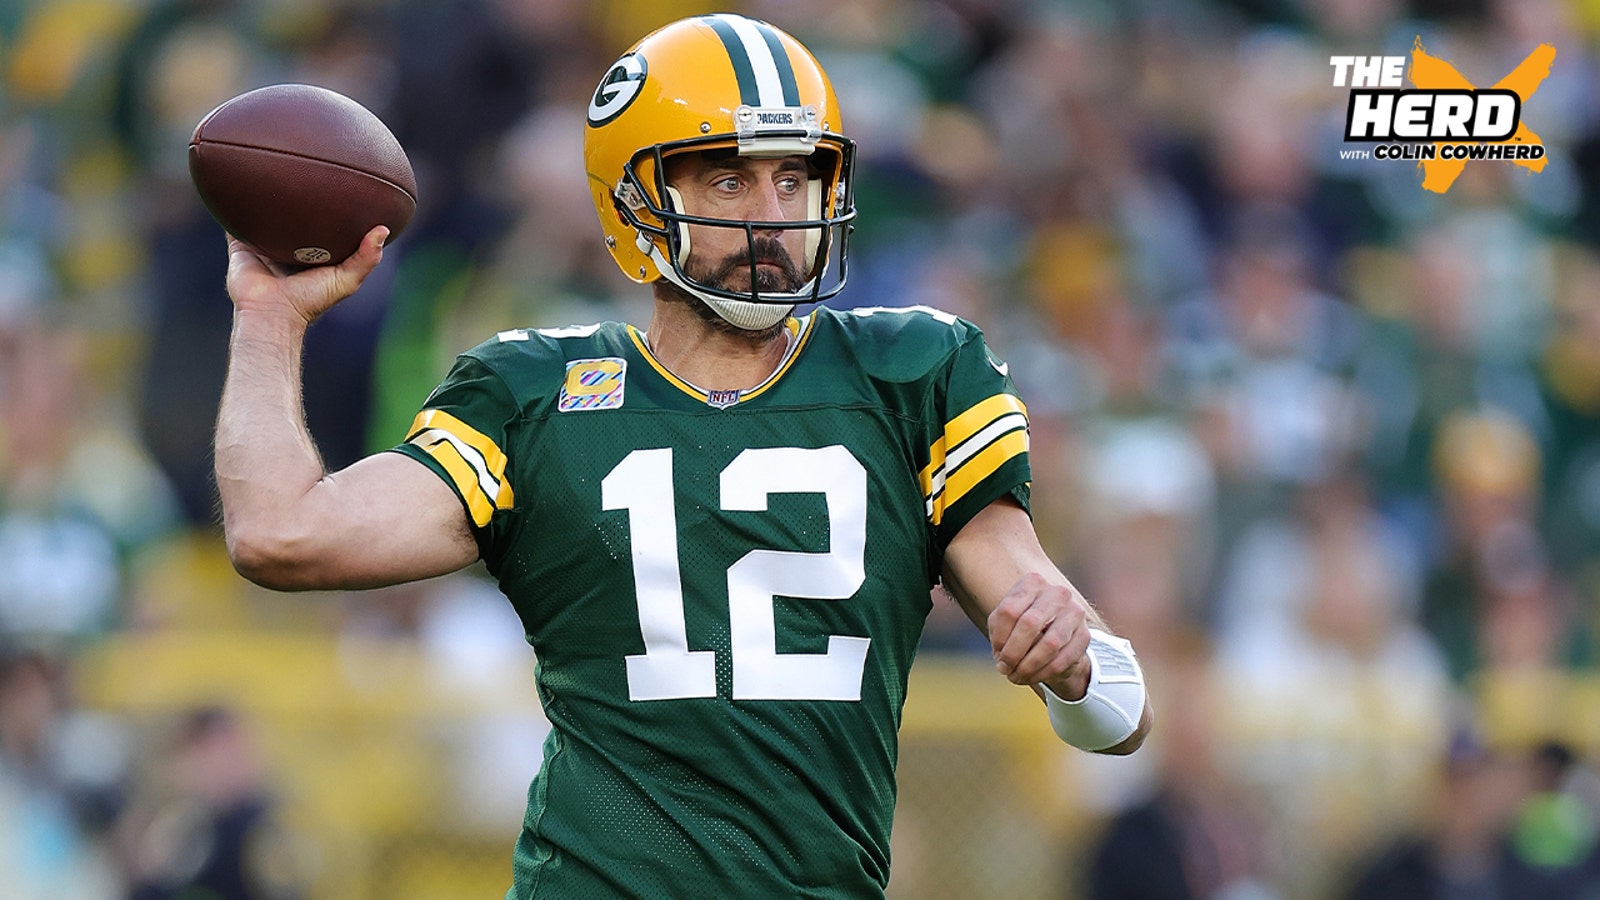 Are Packers legit contenders after OT win vs. Patriots?